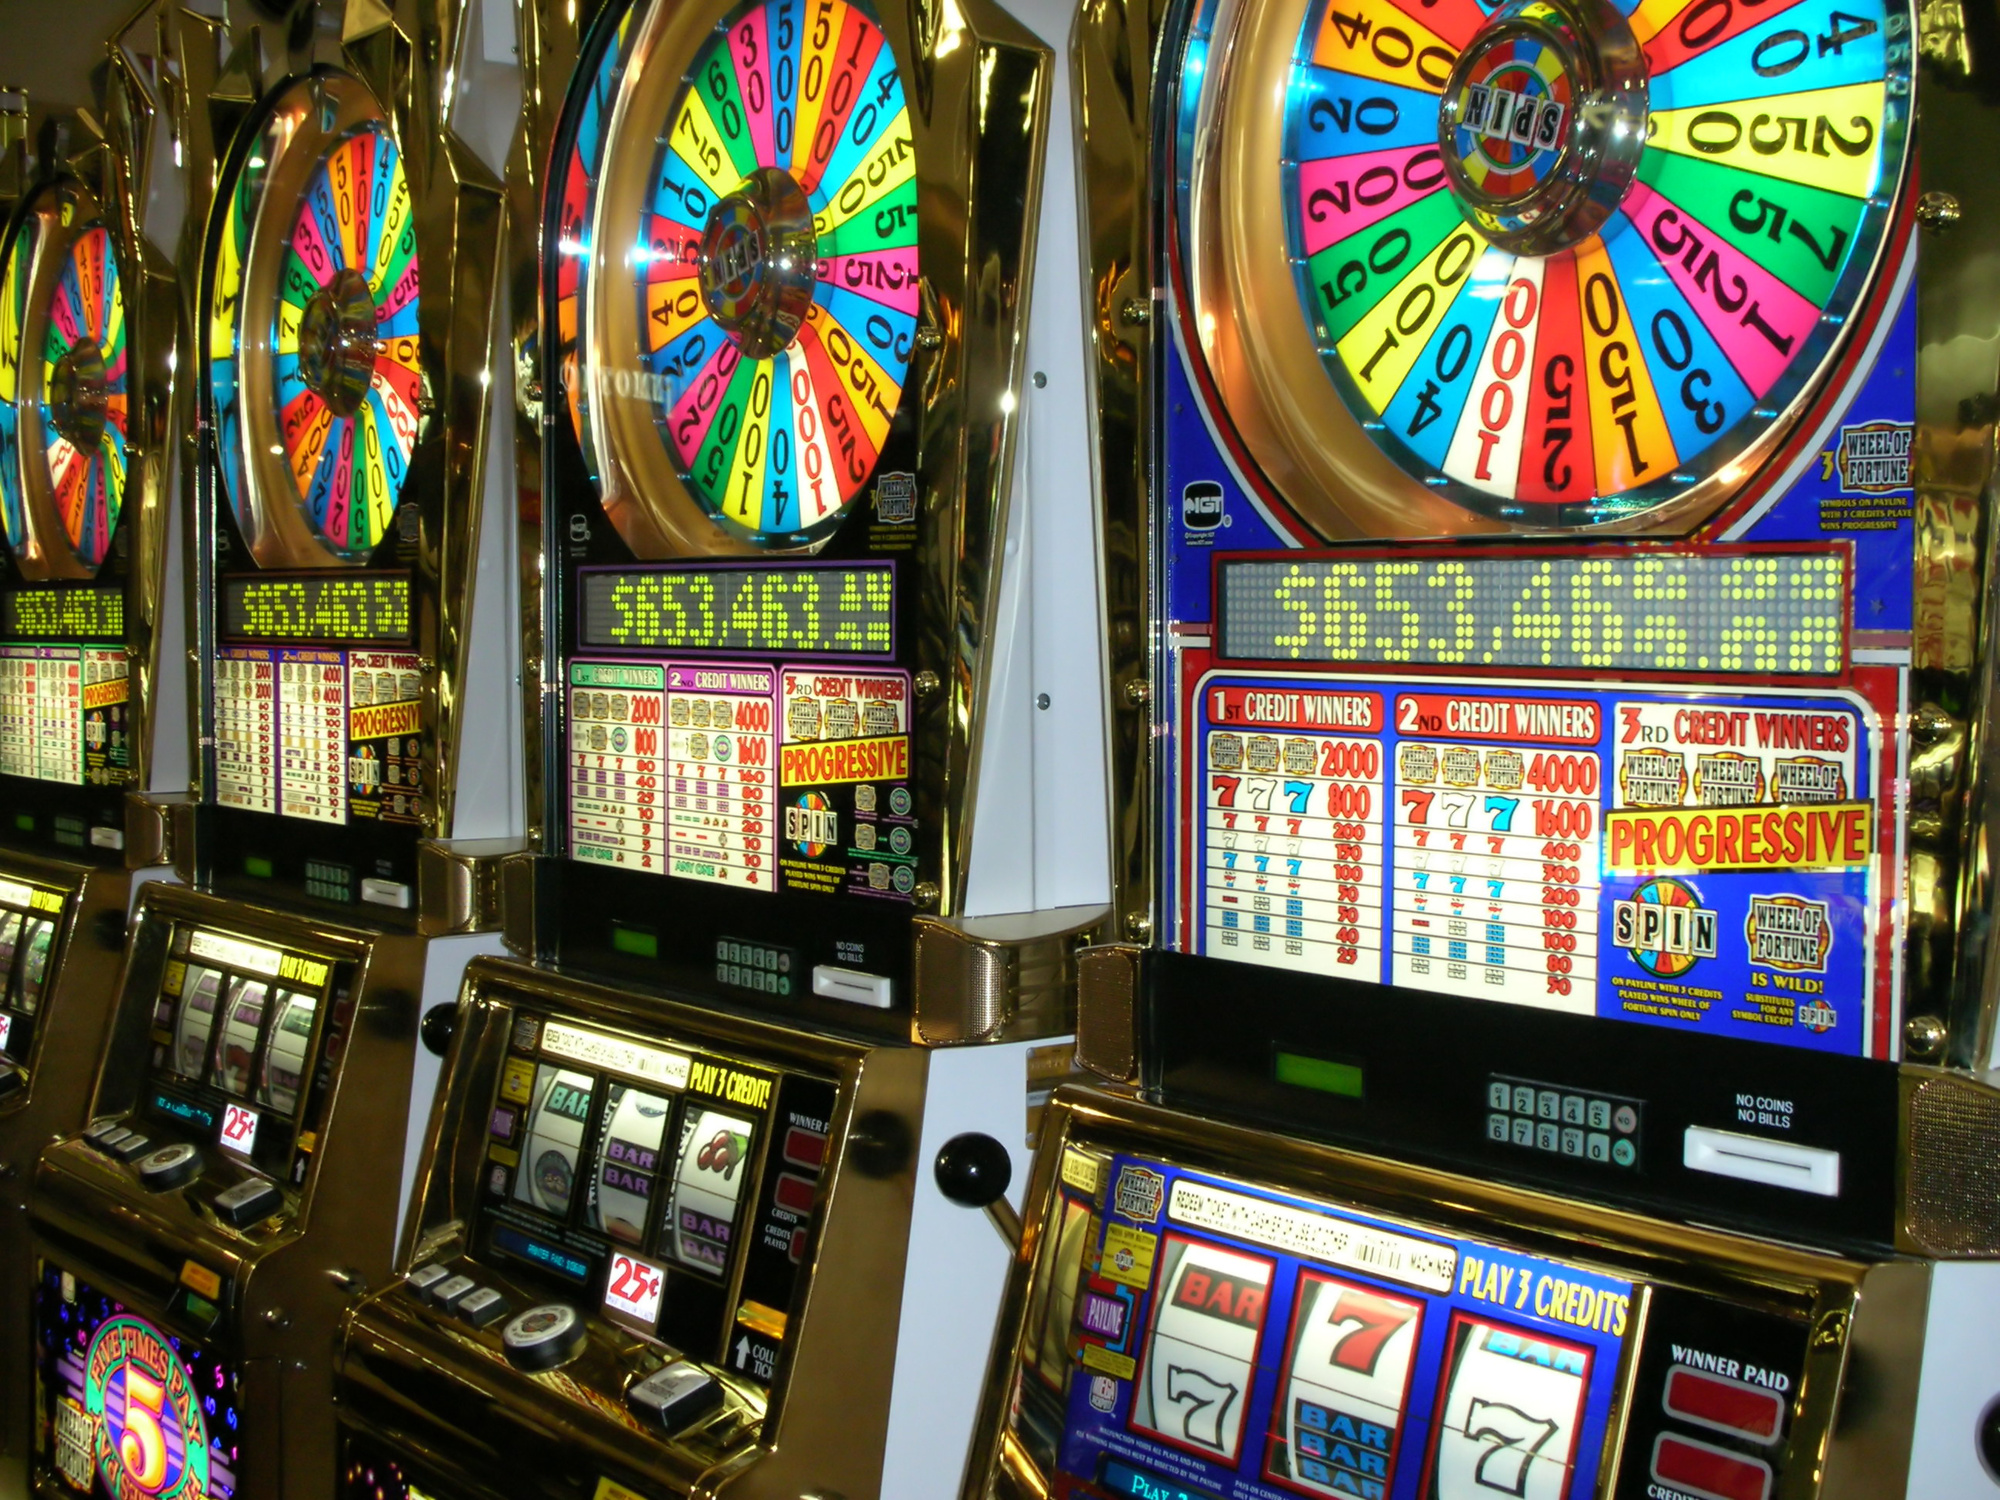 How to Win at Slots: 5 Pro Tips for Winning at Slots